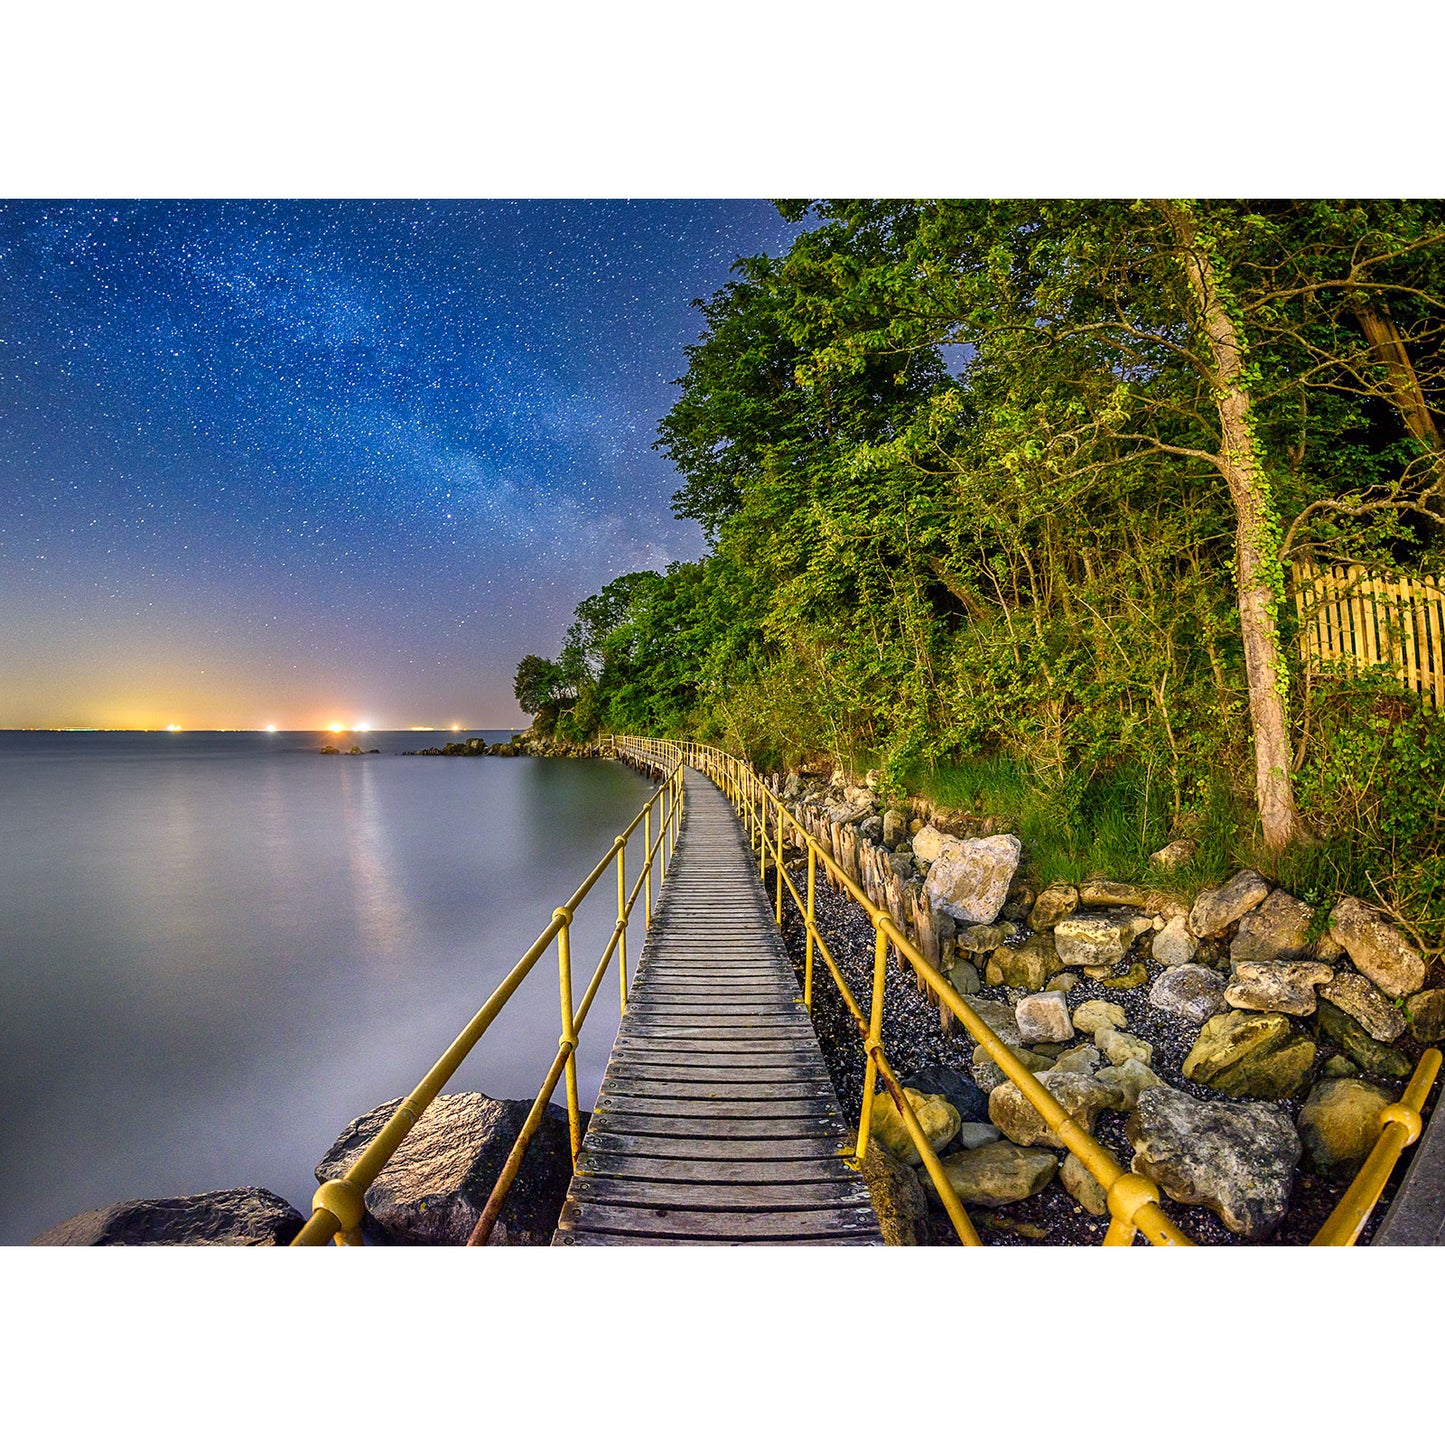 Milky Way, Seagrove Bay - Available Light Photography